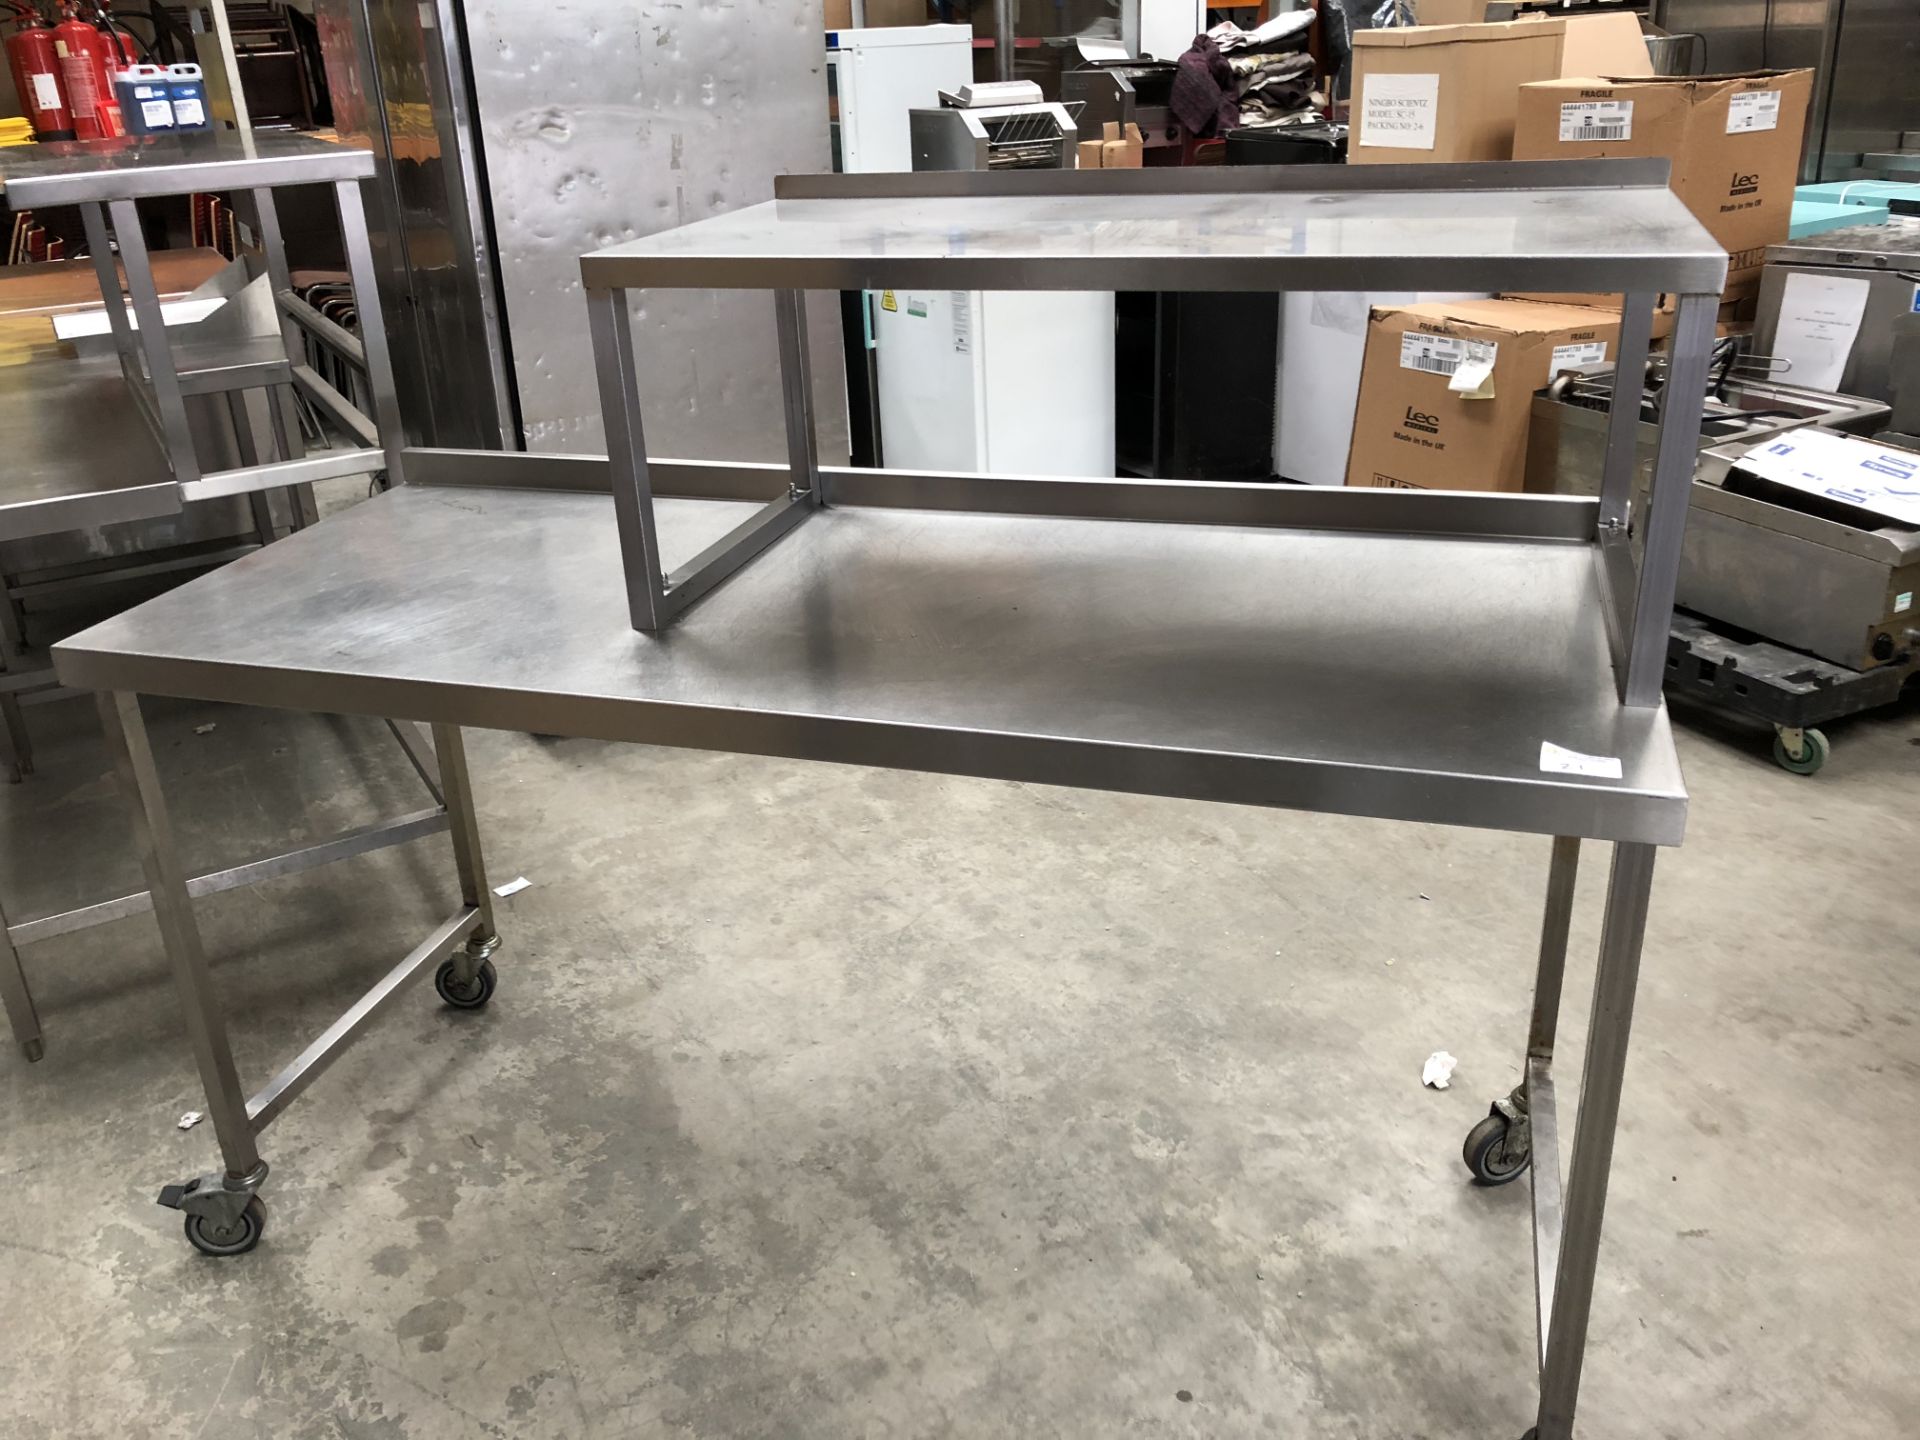 Stainless Steel Table with Overshelf